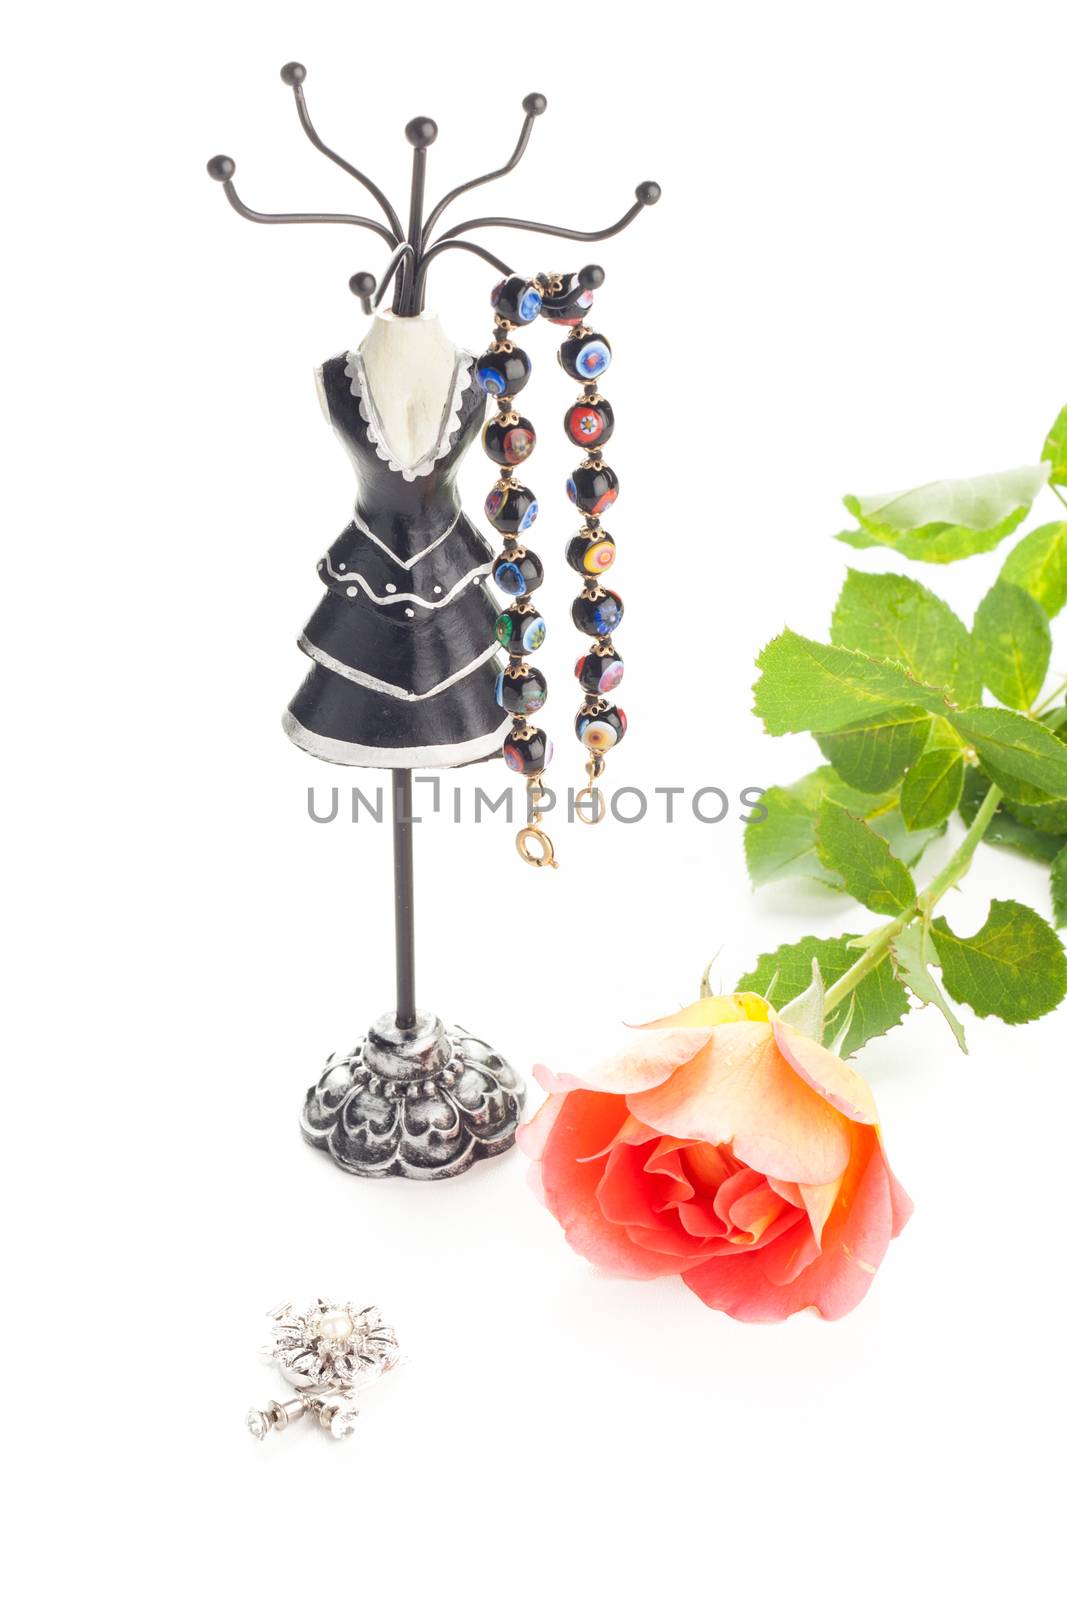 braclet on a stylish jewelry holder and a rose